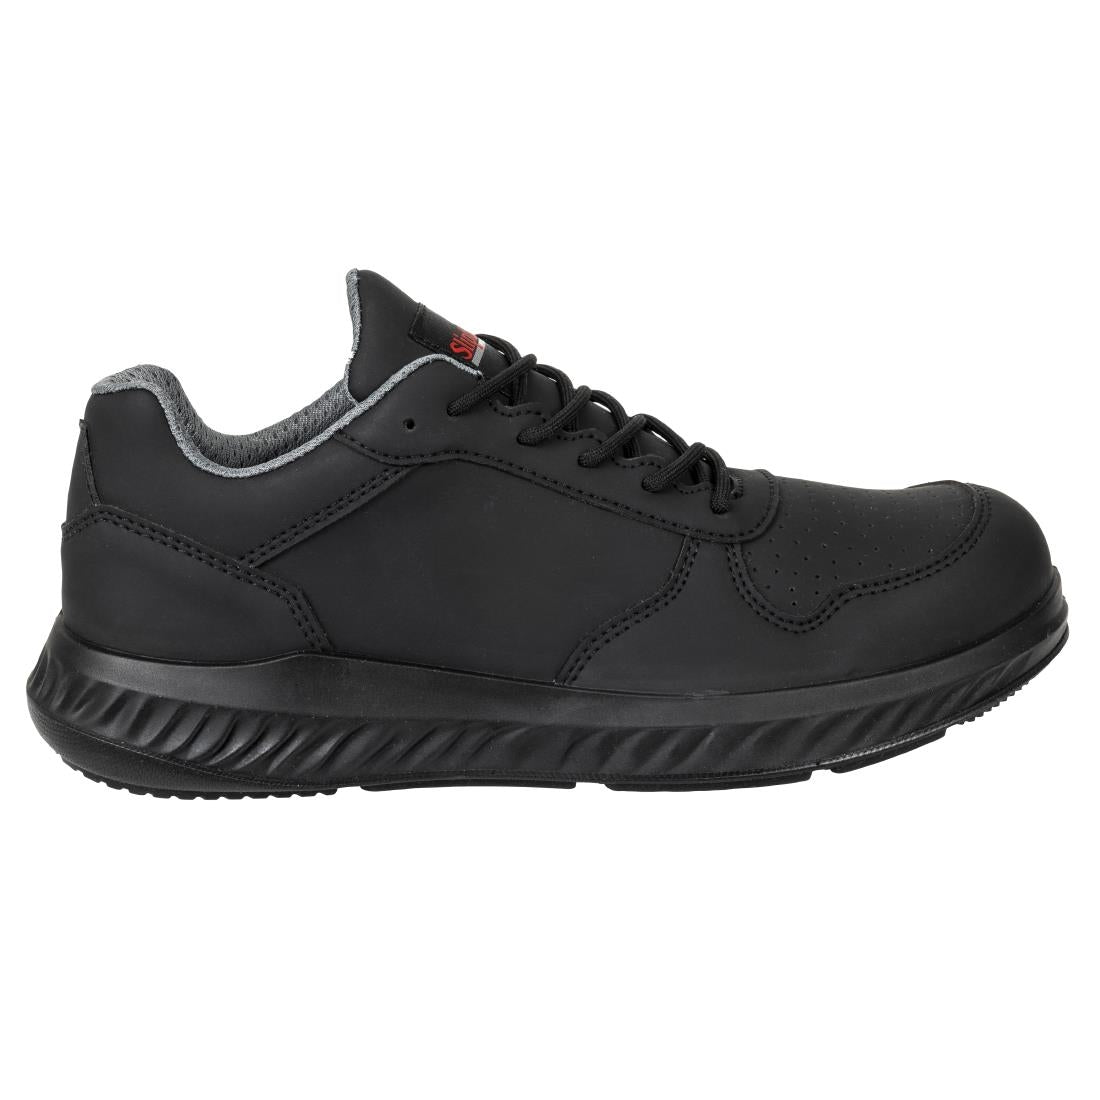 BA063-37 Slipbuster Recycled Microfibre Trainers Matte Black 37 JD Catering Equipment Solutions Ltd